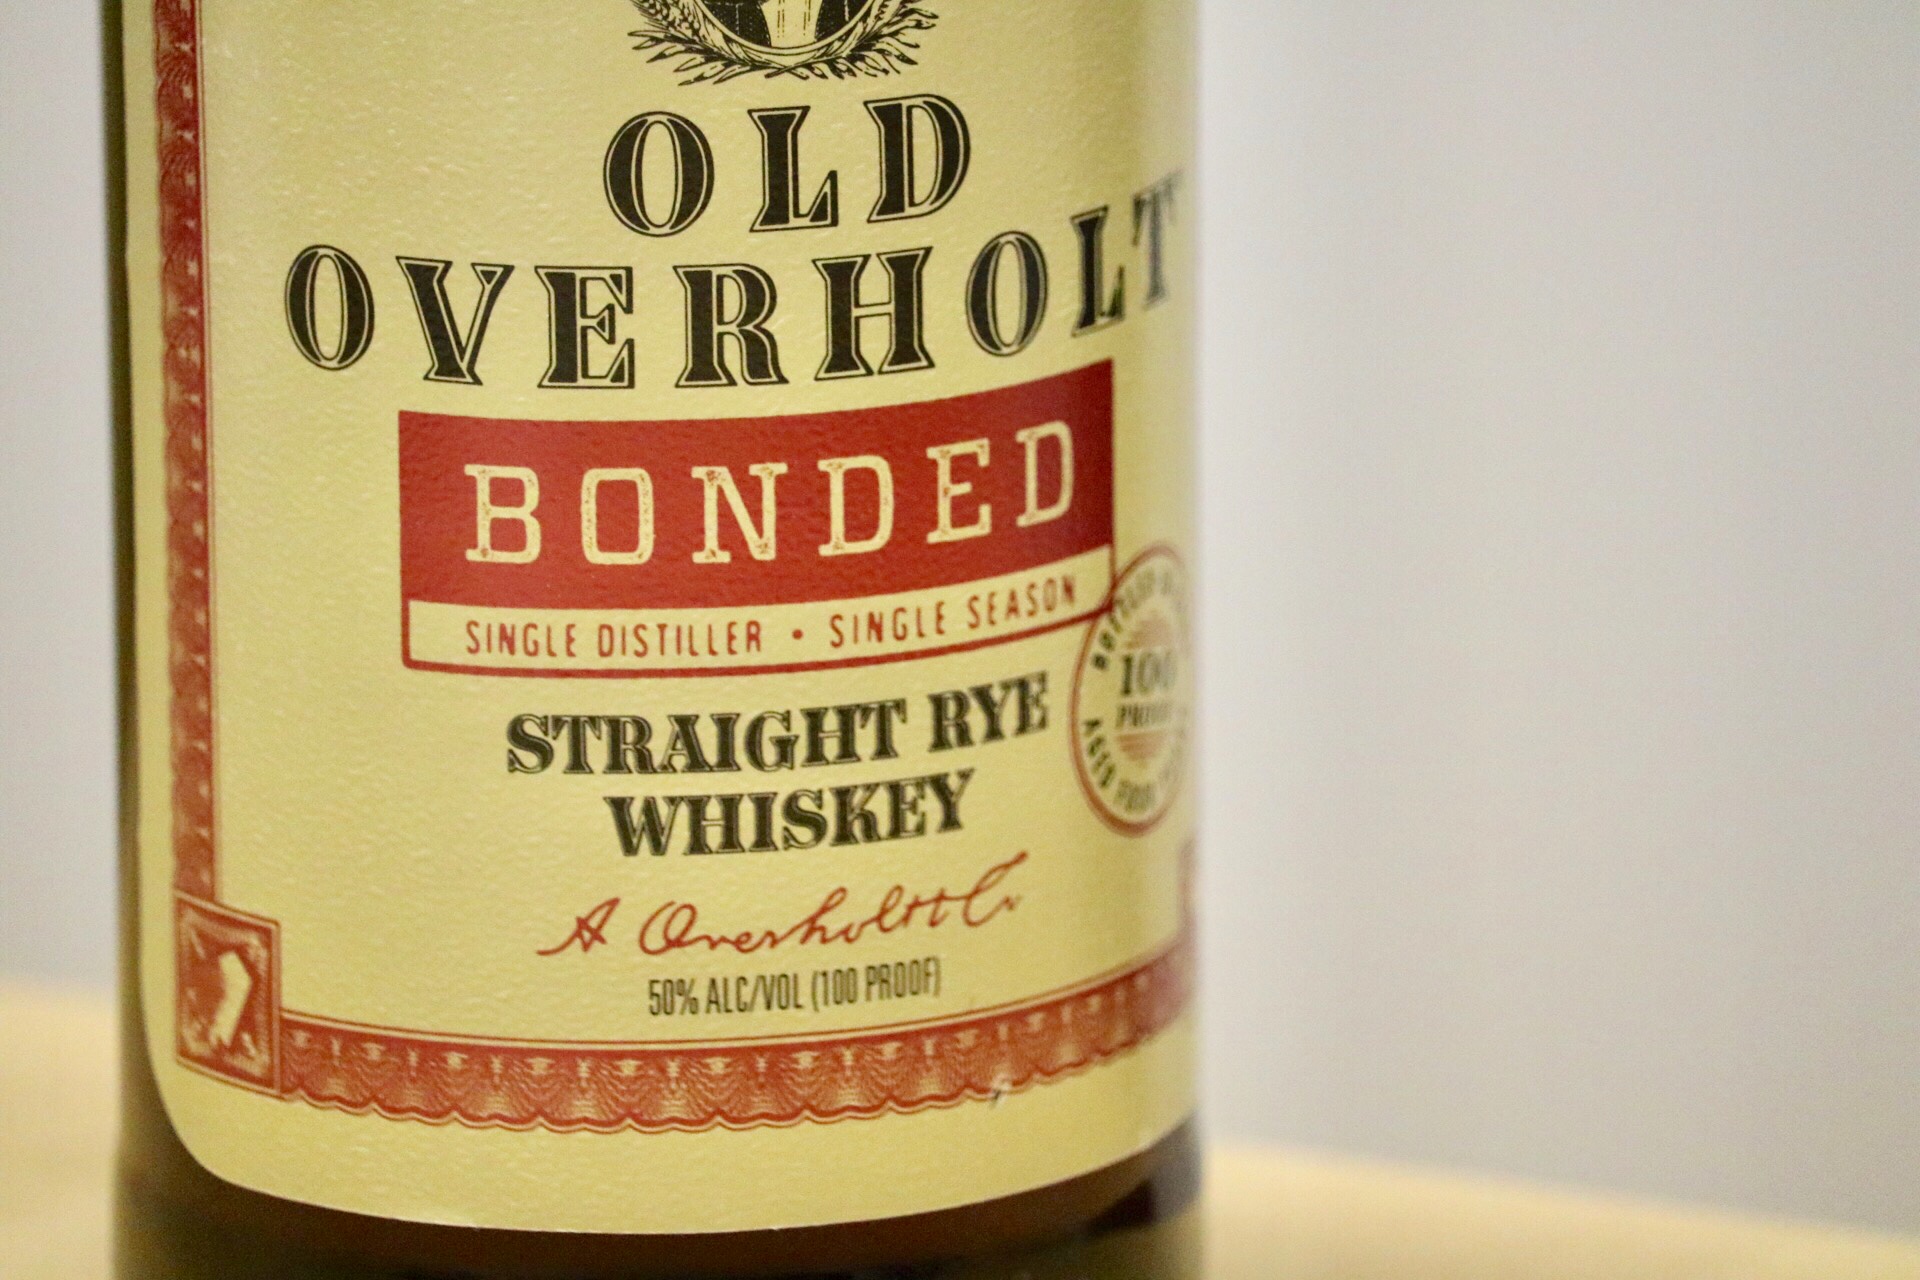 You are currently viewing Old Overholt Bonded Straight Rye Whiskey Review